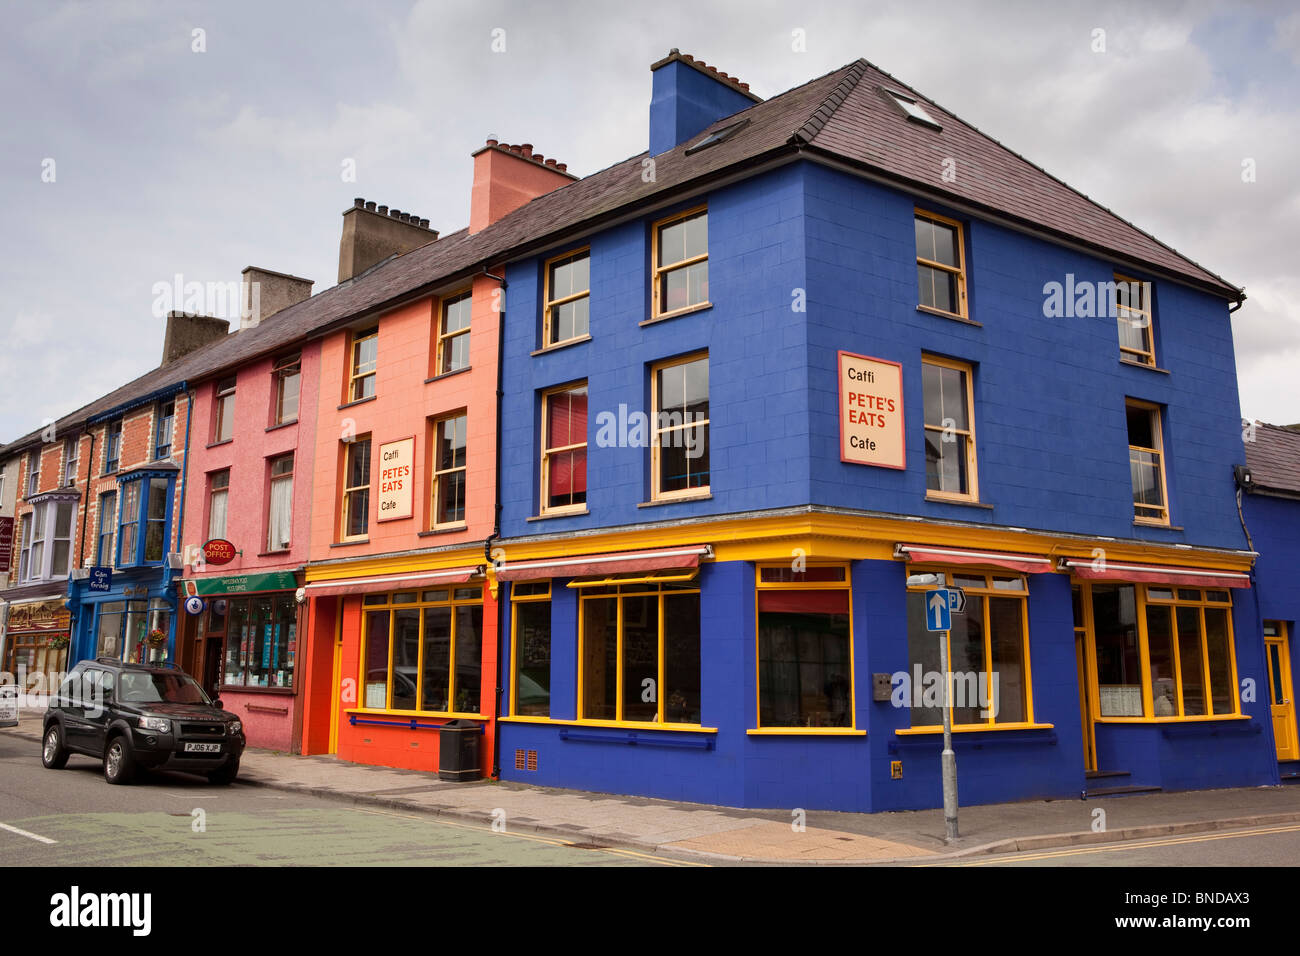 UK, Wales, Snowdonia, Llanberis, Stryd Fawr, High Street, Pete’s Eats well-known colourfully painted cafe Stock Photo